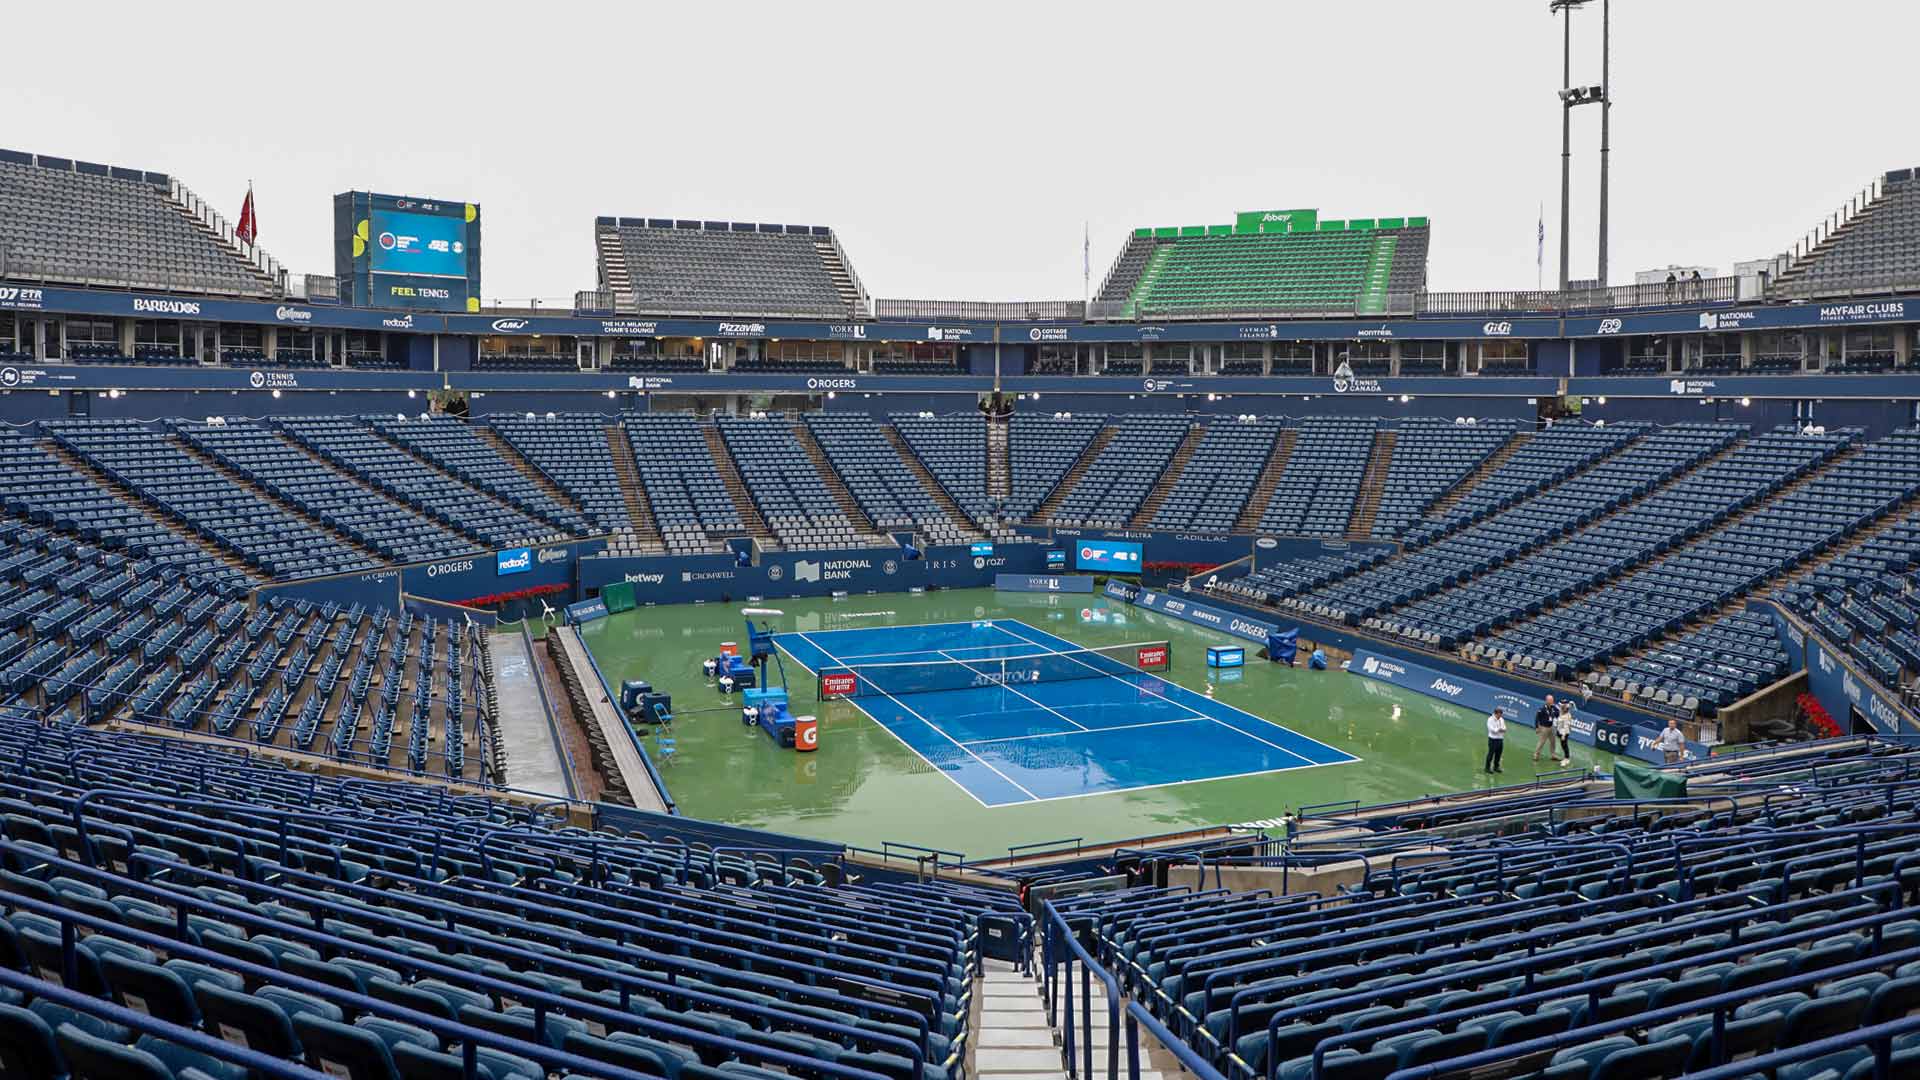 Sobeys Stadium is centre court at the National Bank Open Presented by Rogers in Toronto.